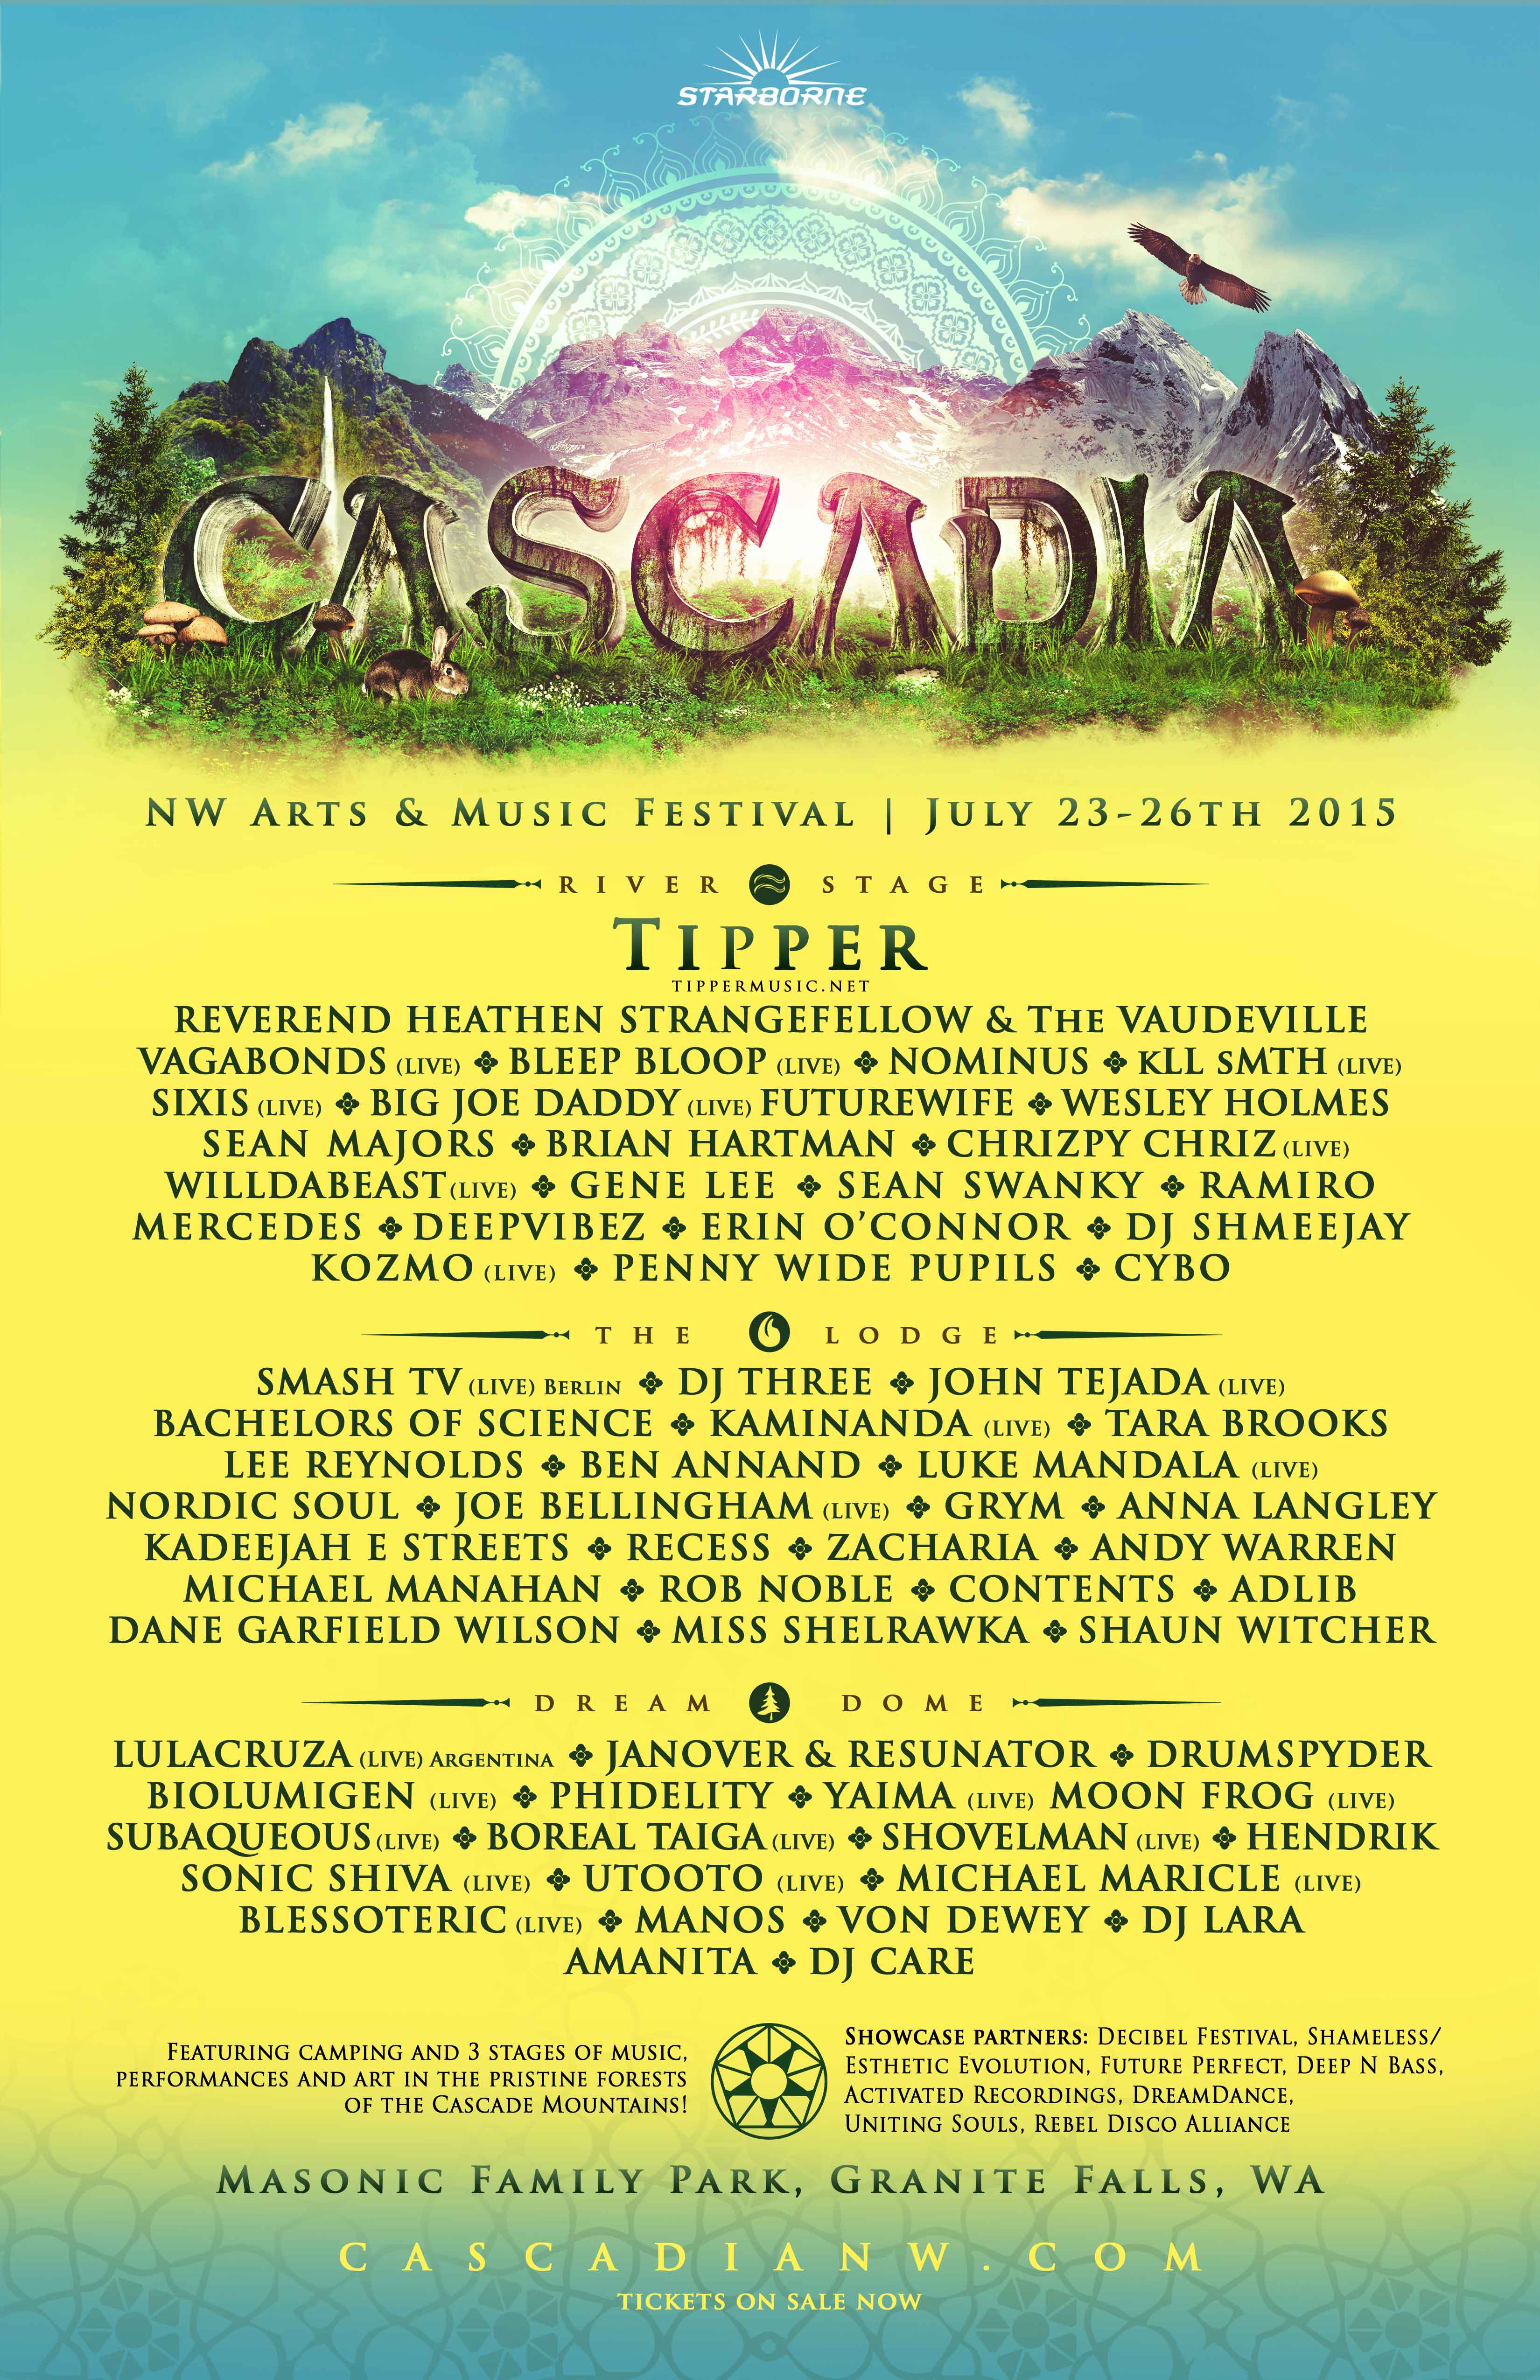 Lineup Announced for Cascadia NW Arts and Music Festival 2015!! BeatMaps